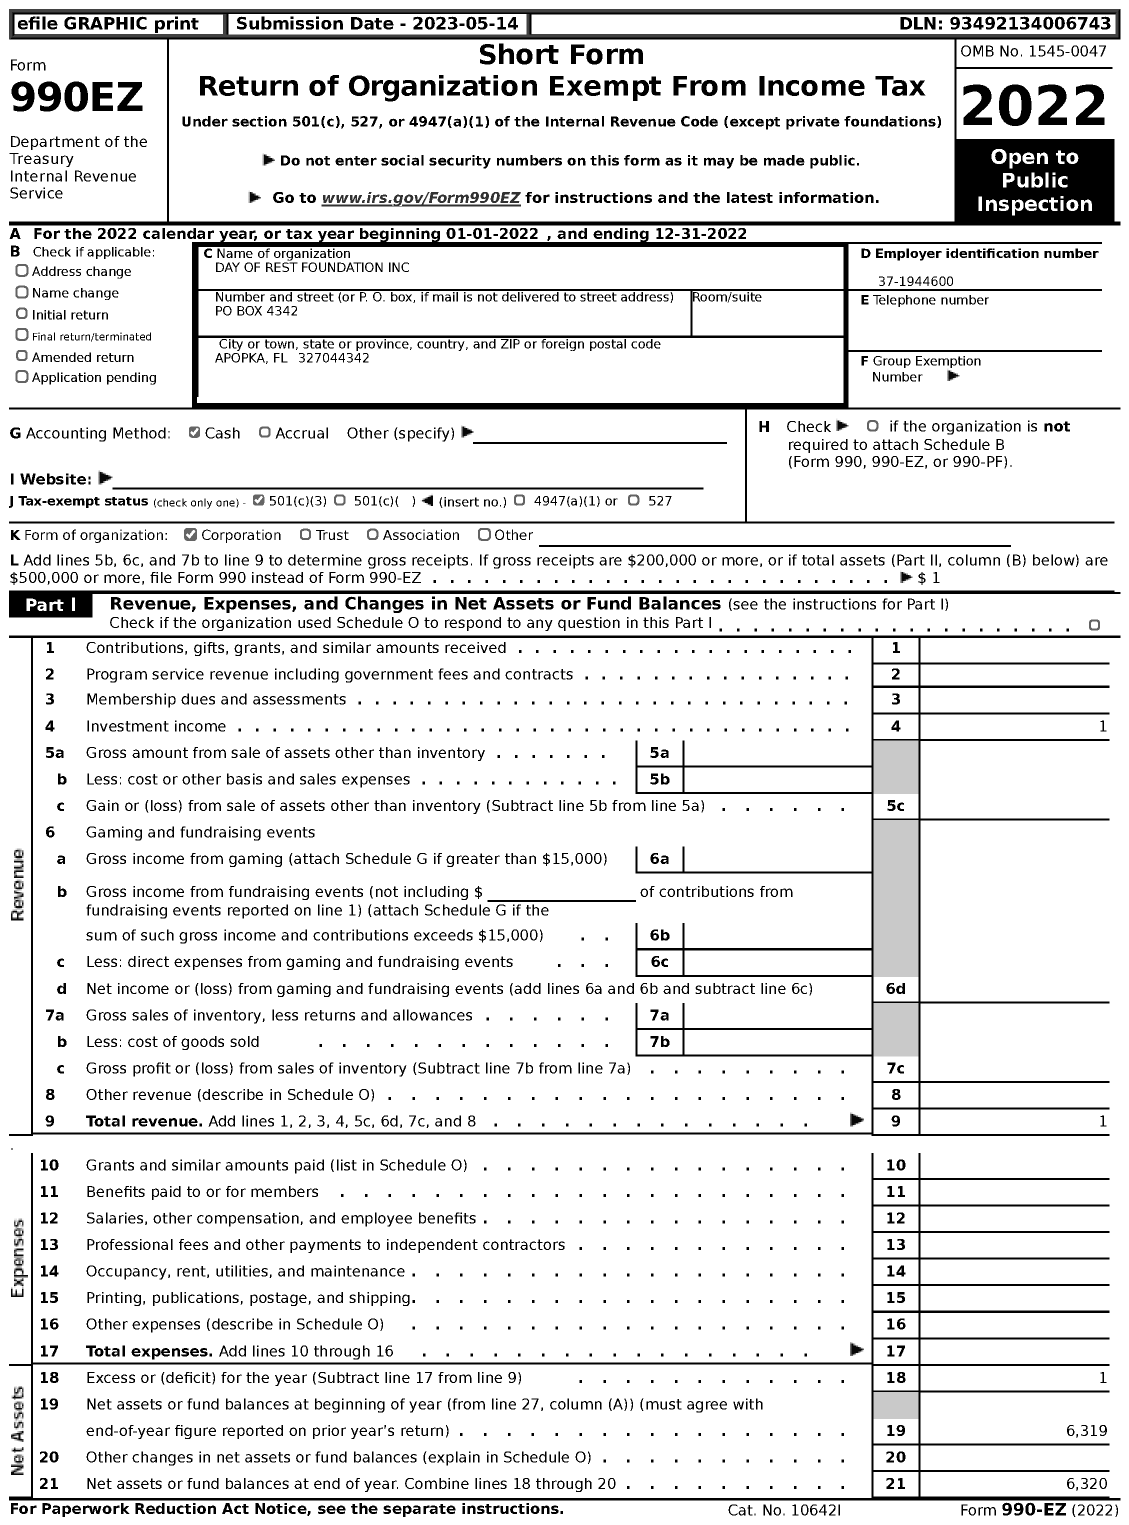 Image of first page of 2022 Form 990EZ for Day of Rest Foundation